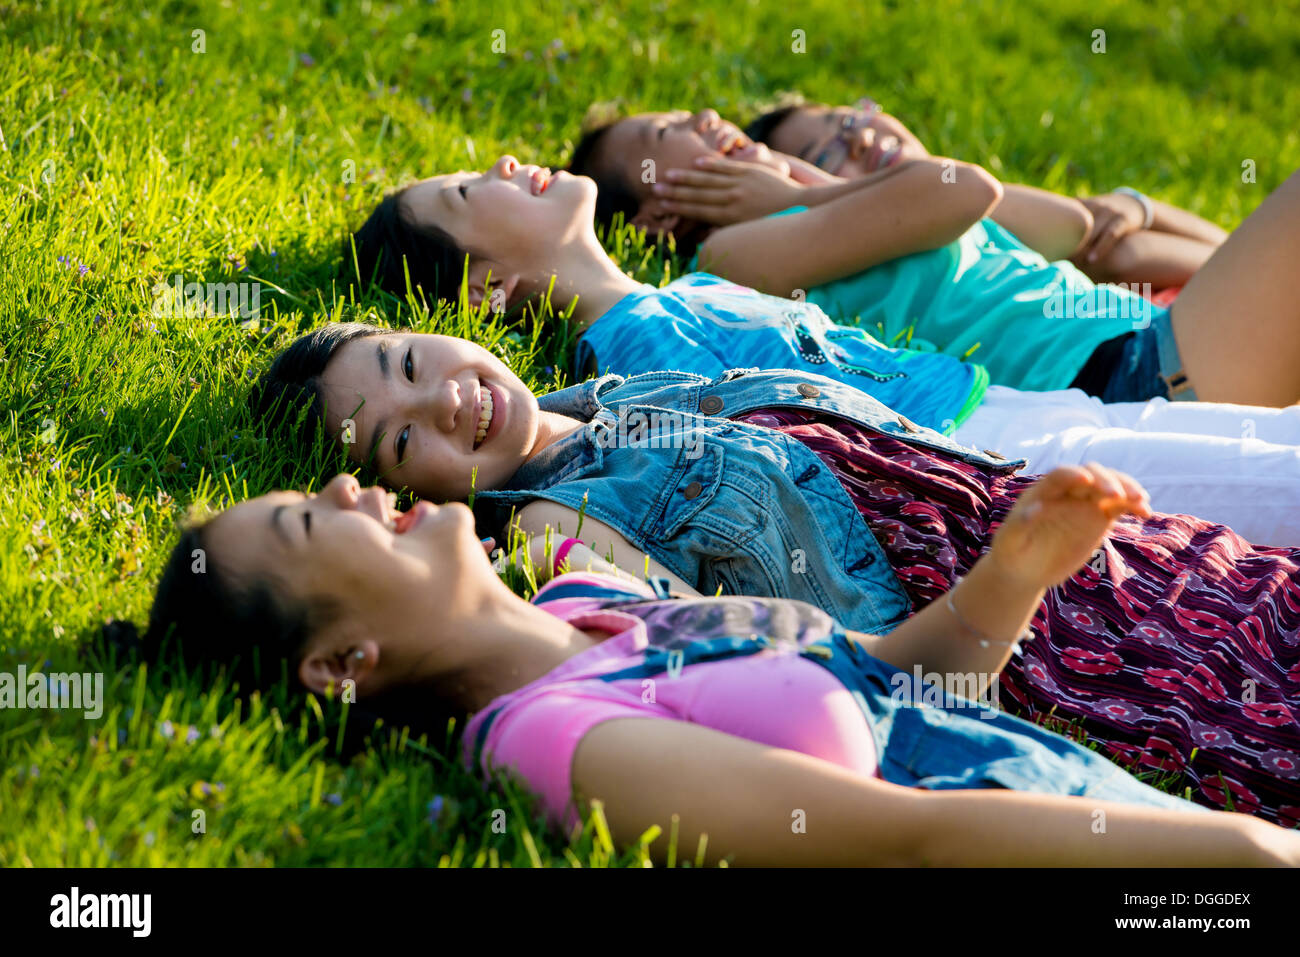 Girls lying on grass Banque D'Images